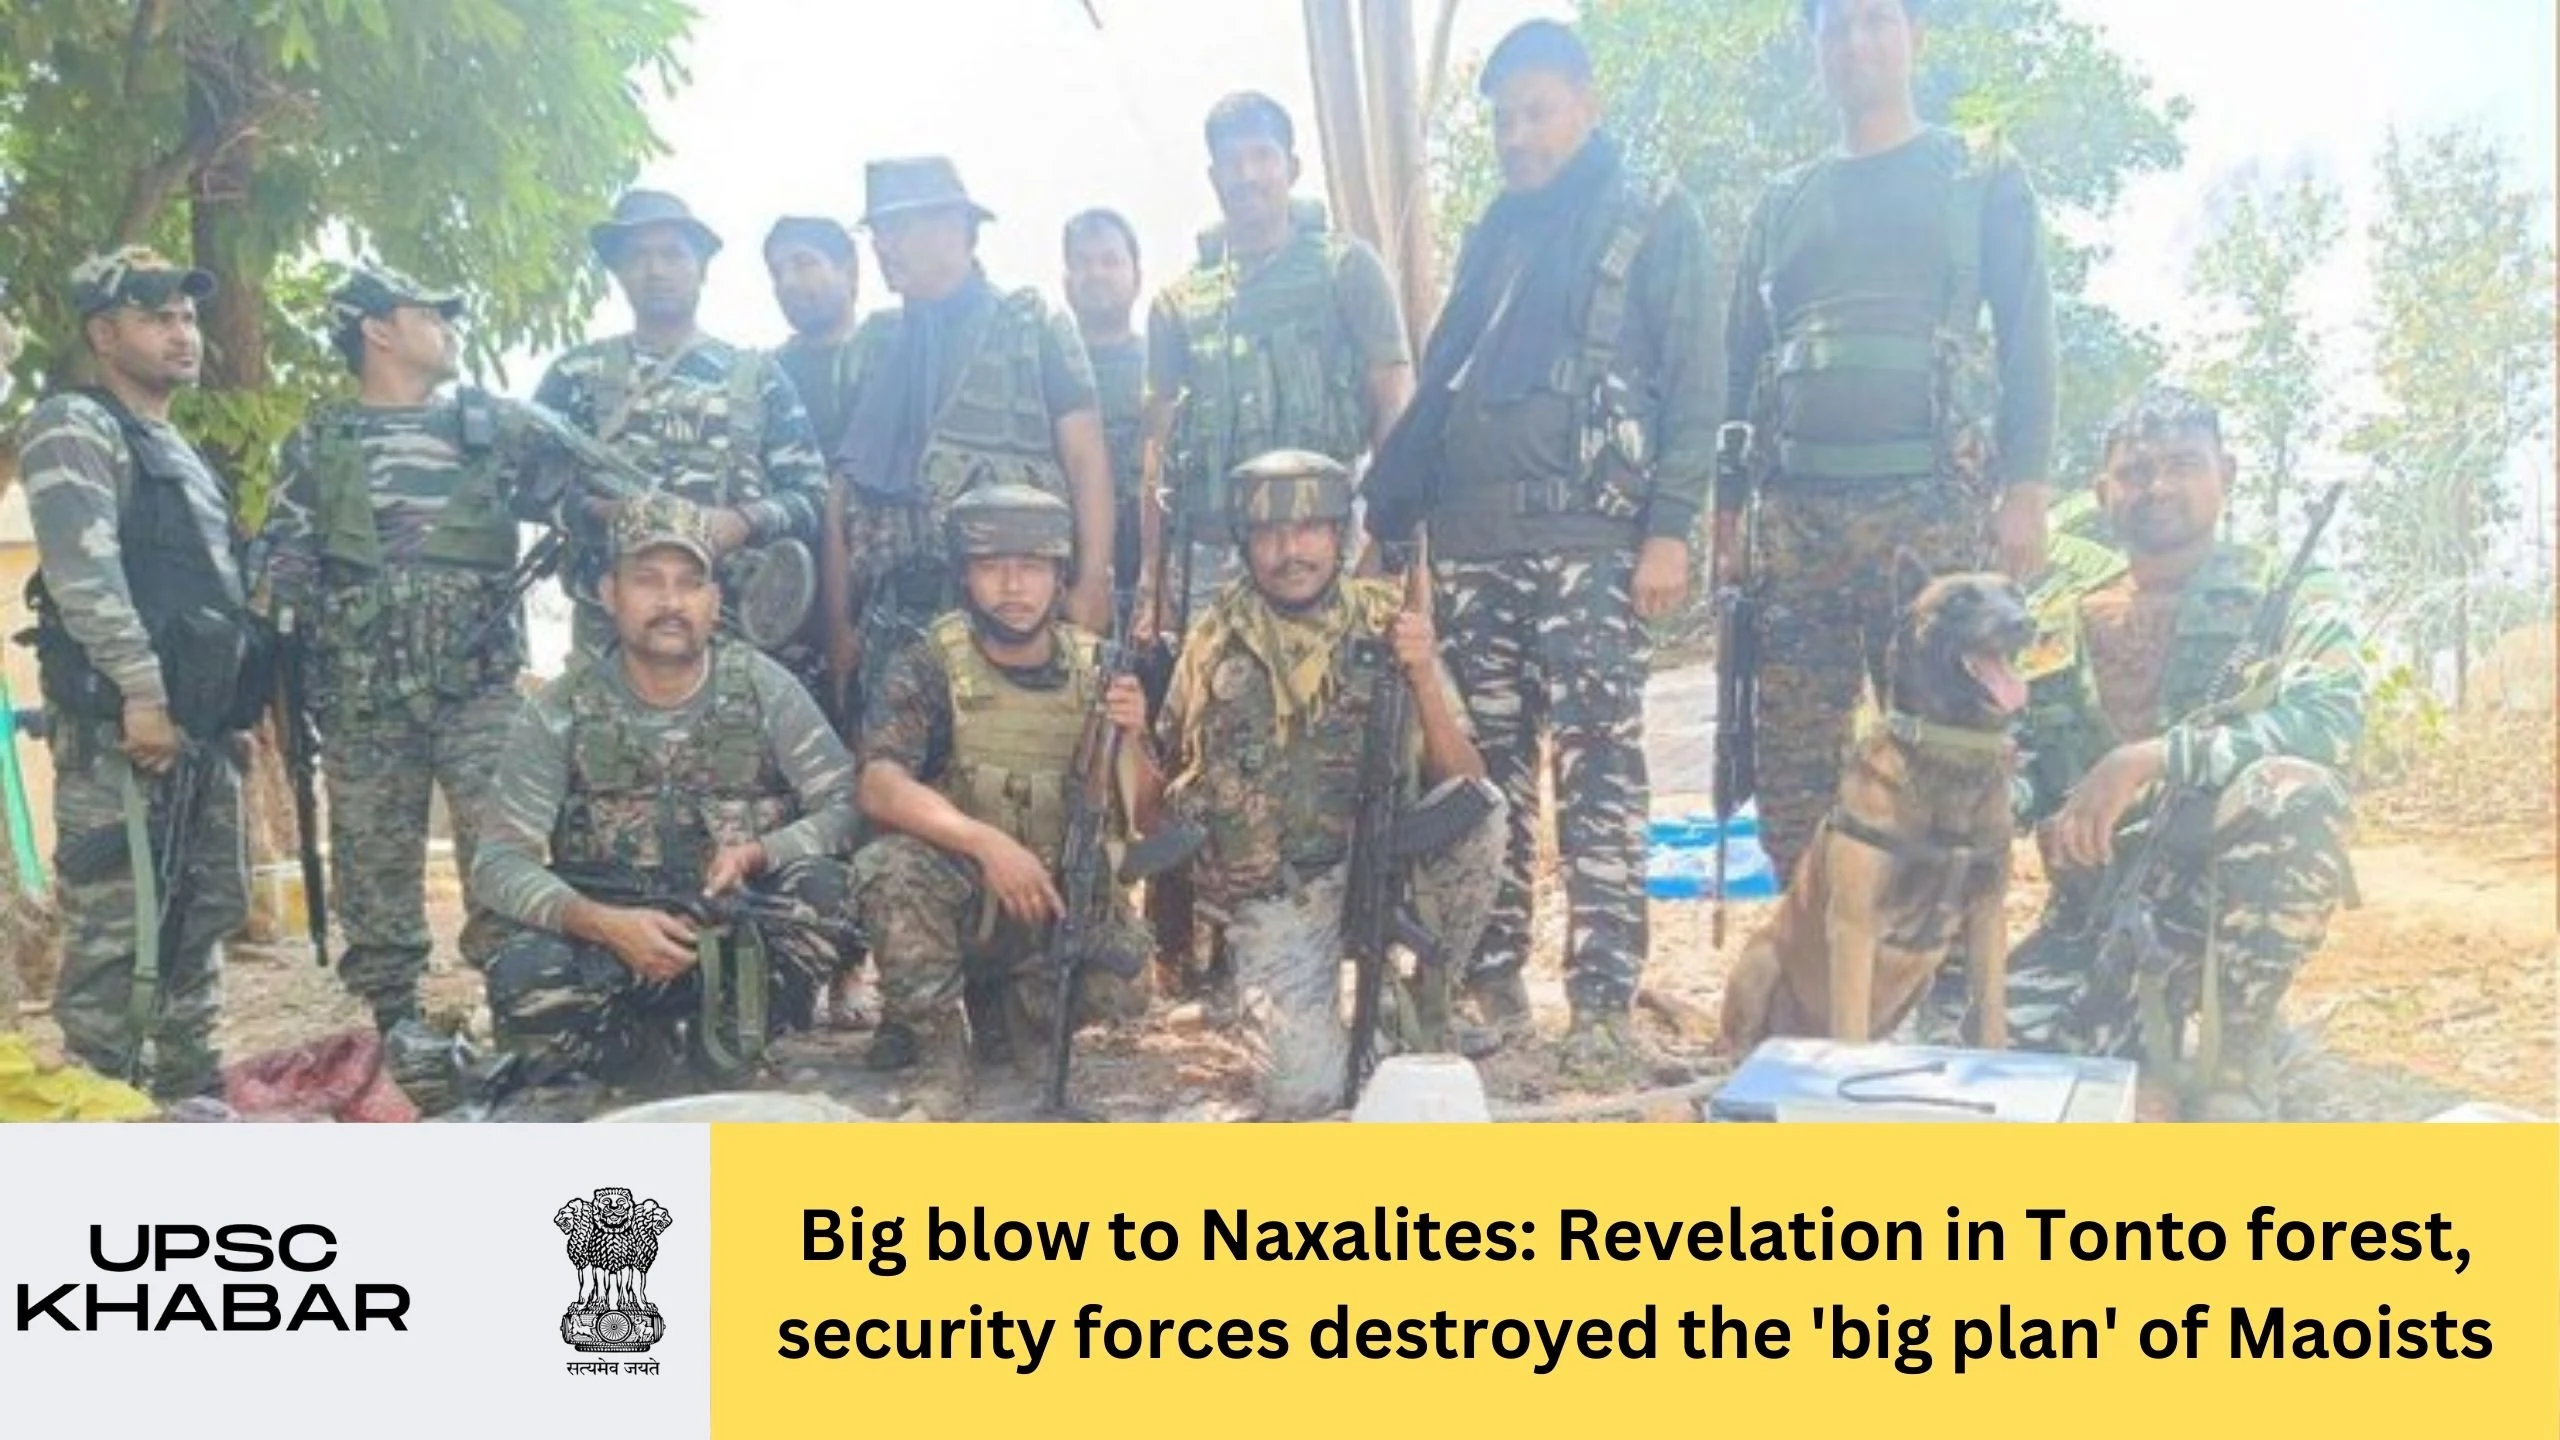 Big blow to Naxalites: Revelation in Tonto forest, security forces destroyed the 'big plan' of Maoists